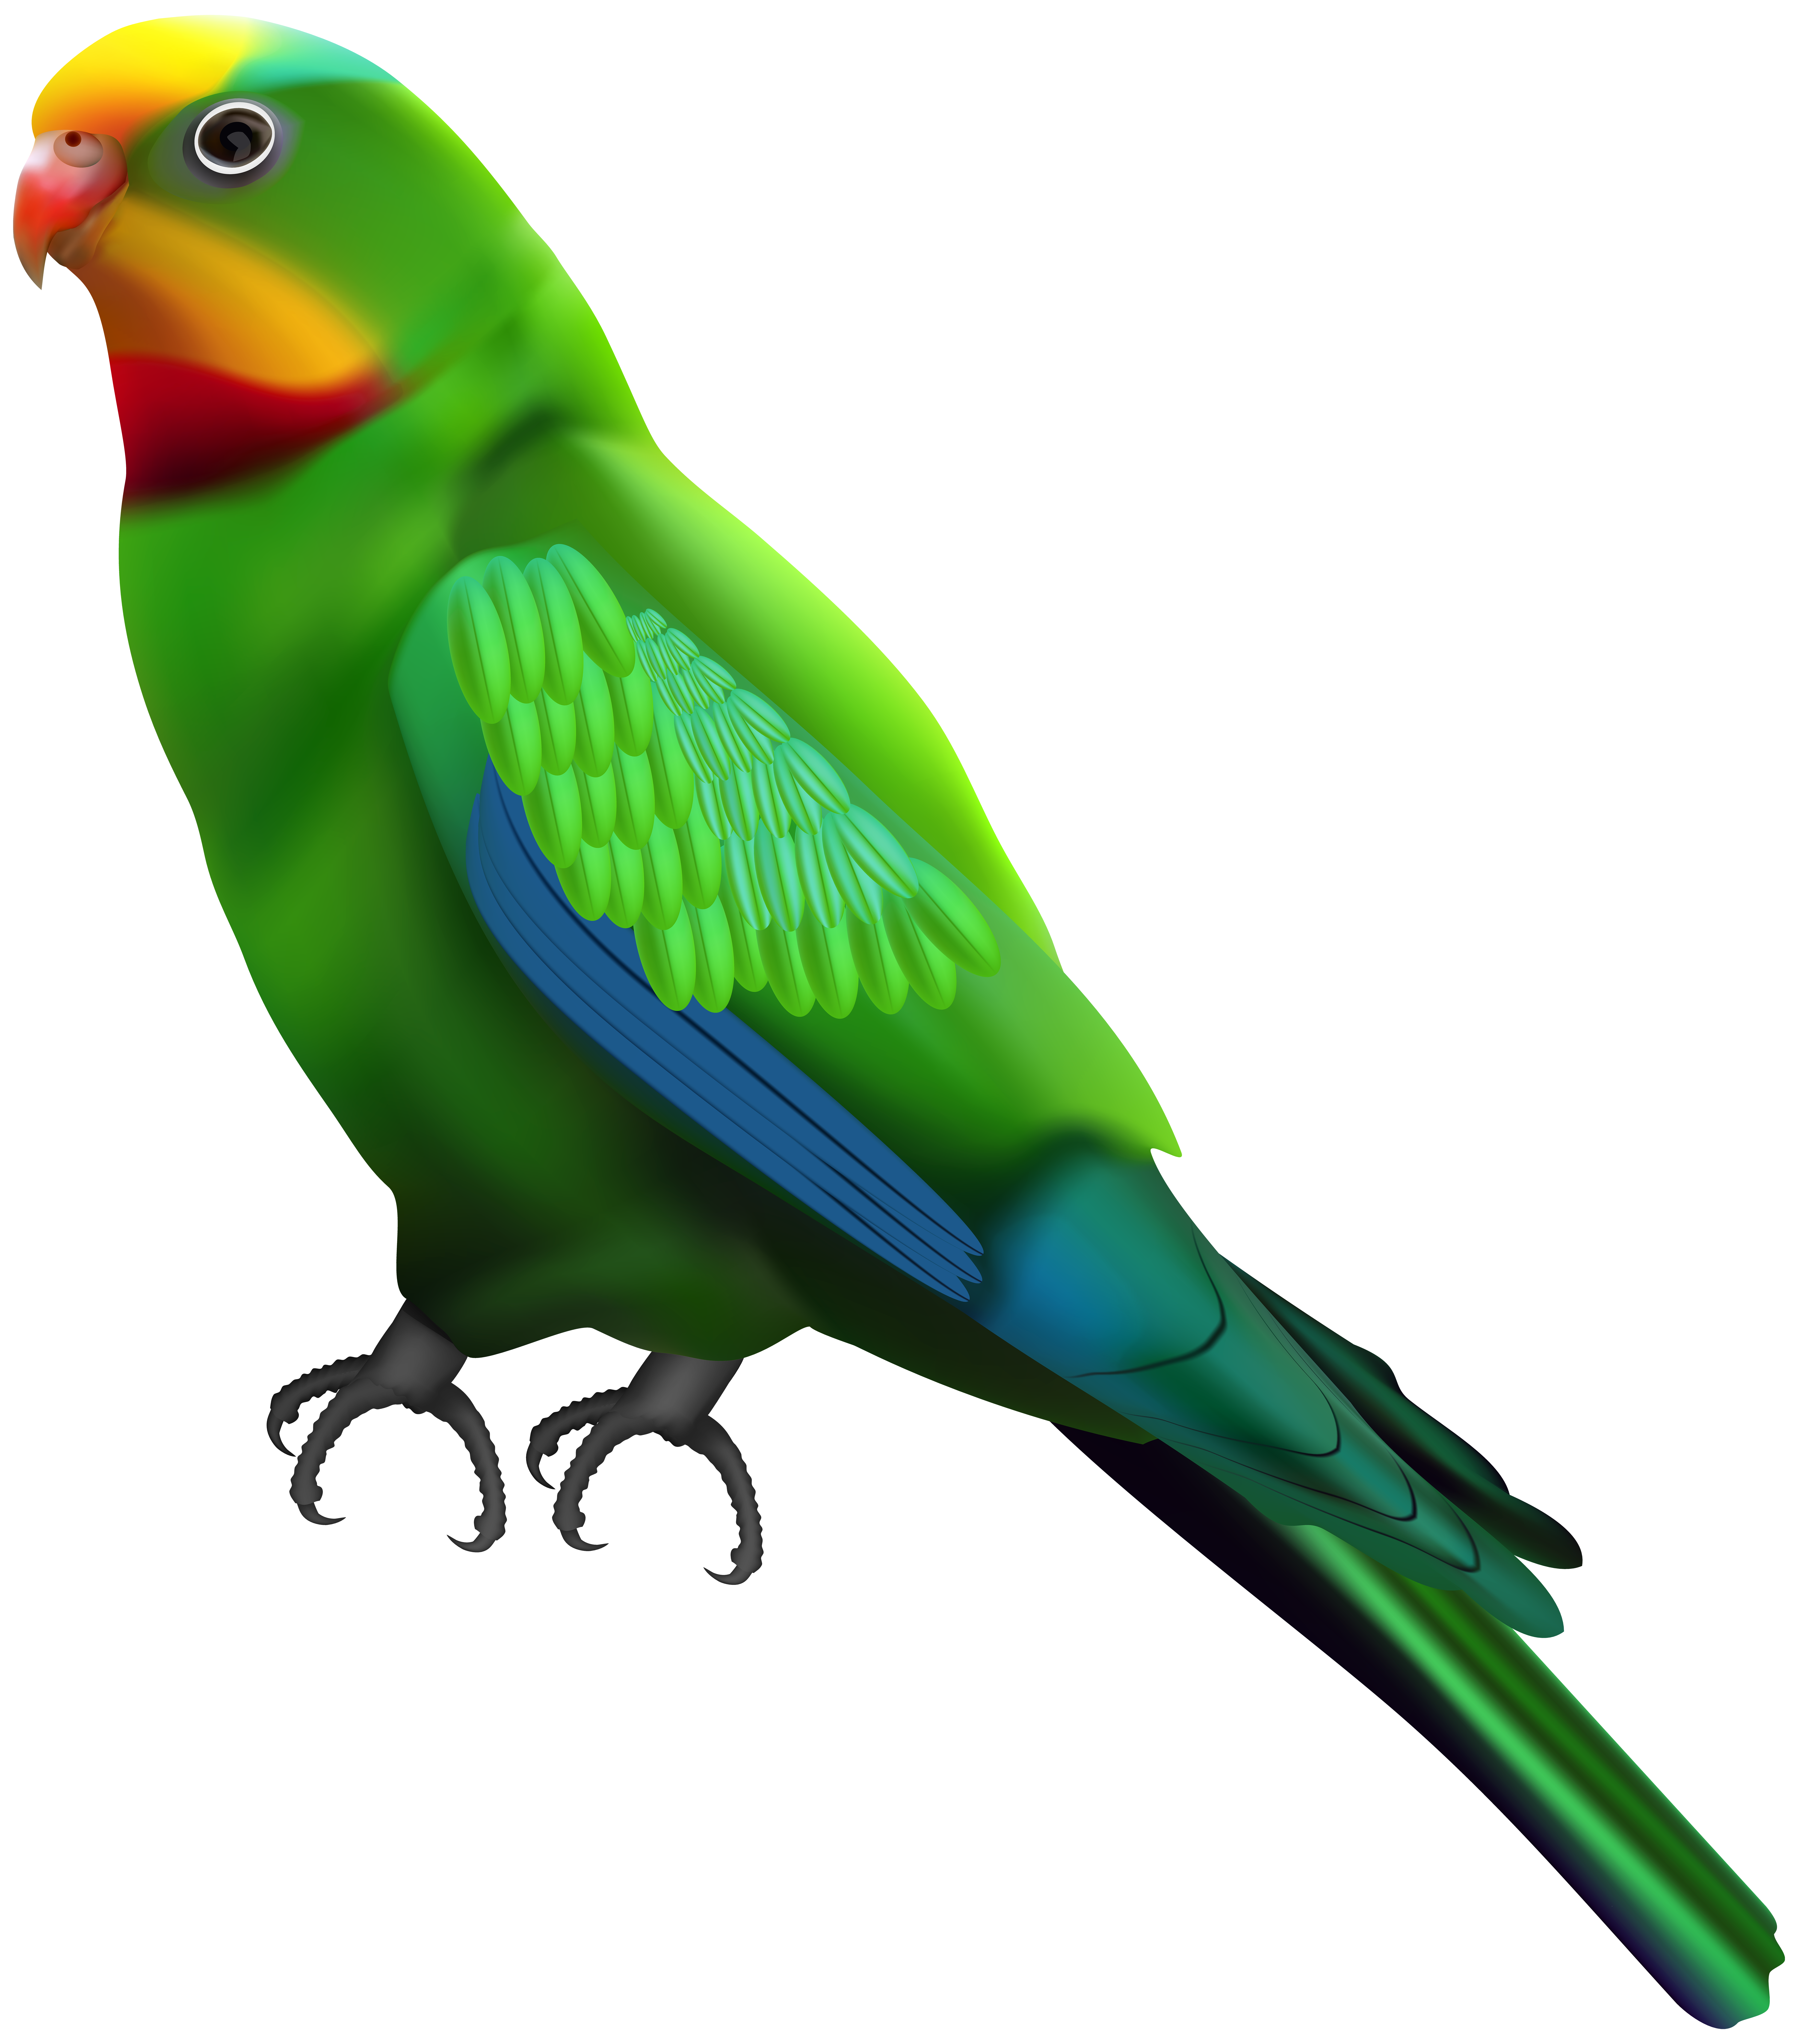 Green Parrot Transparent Clip Art Image | Gallery Yopriceville 